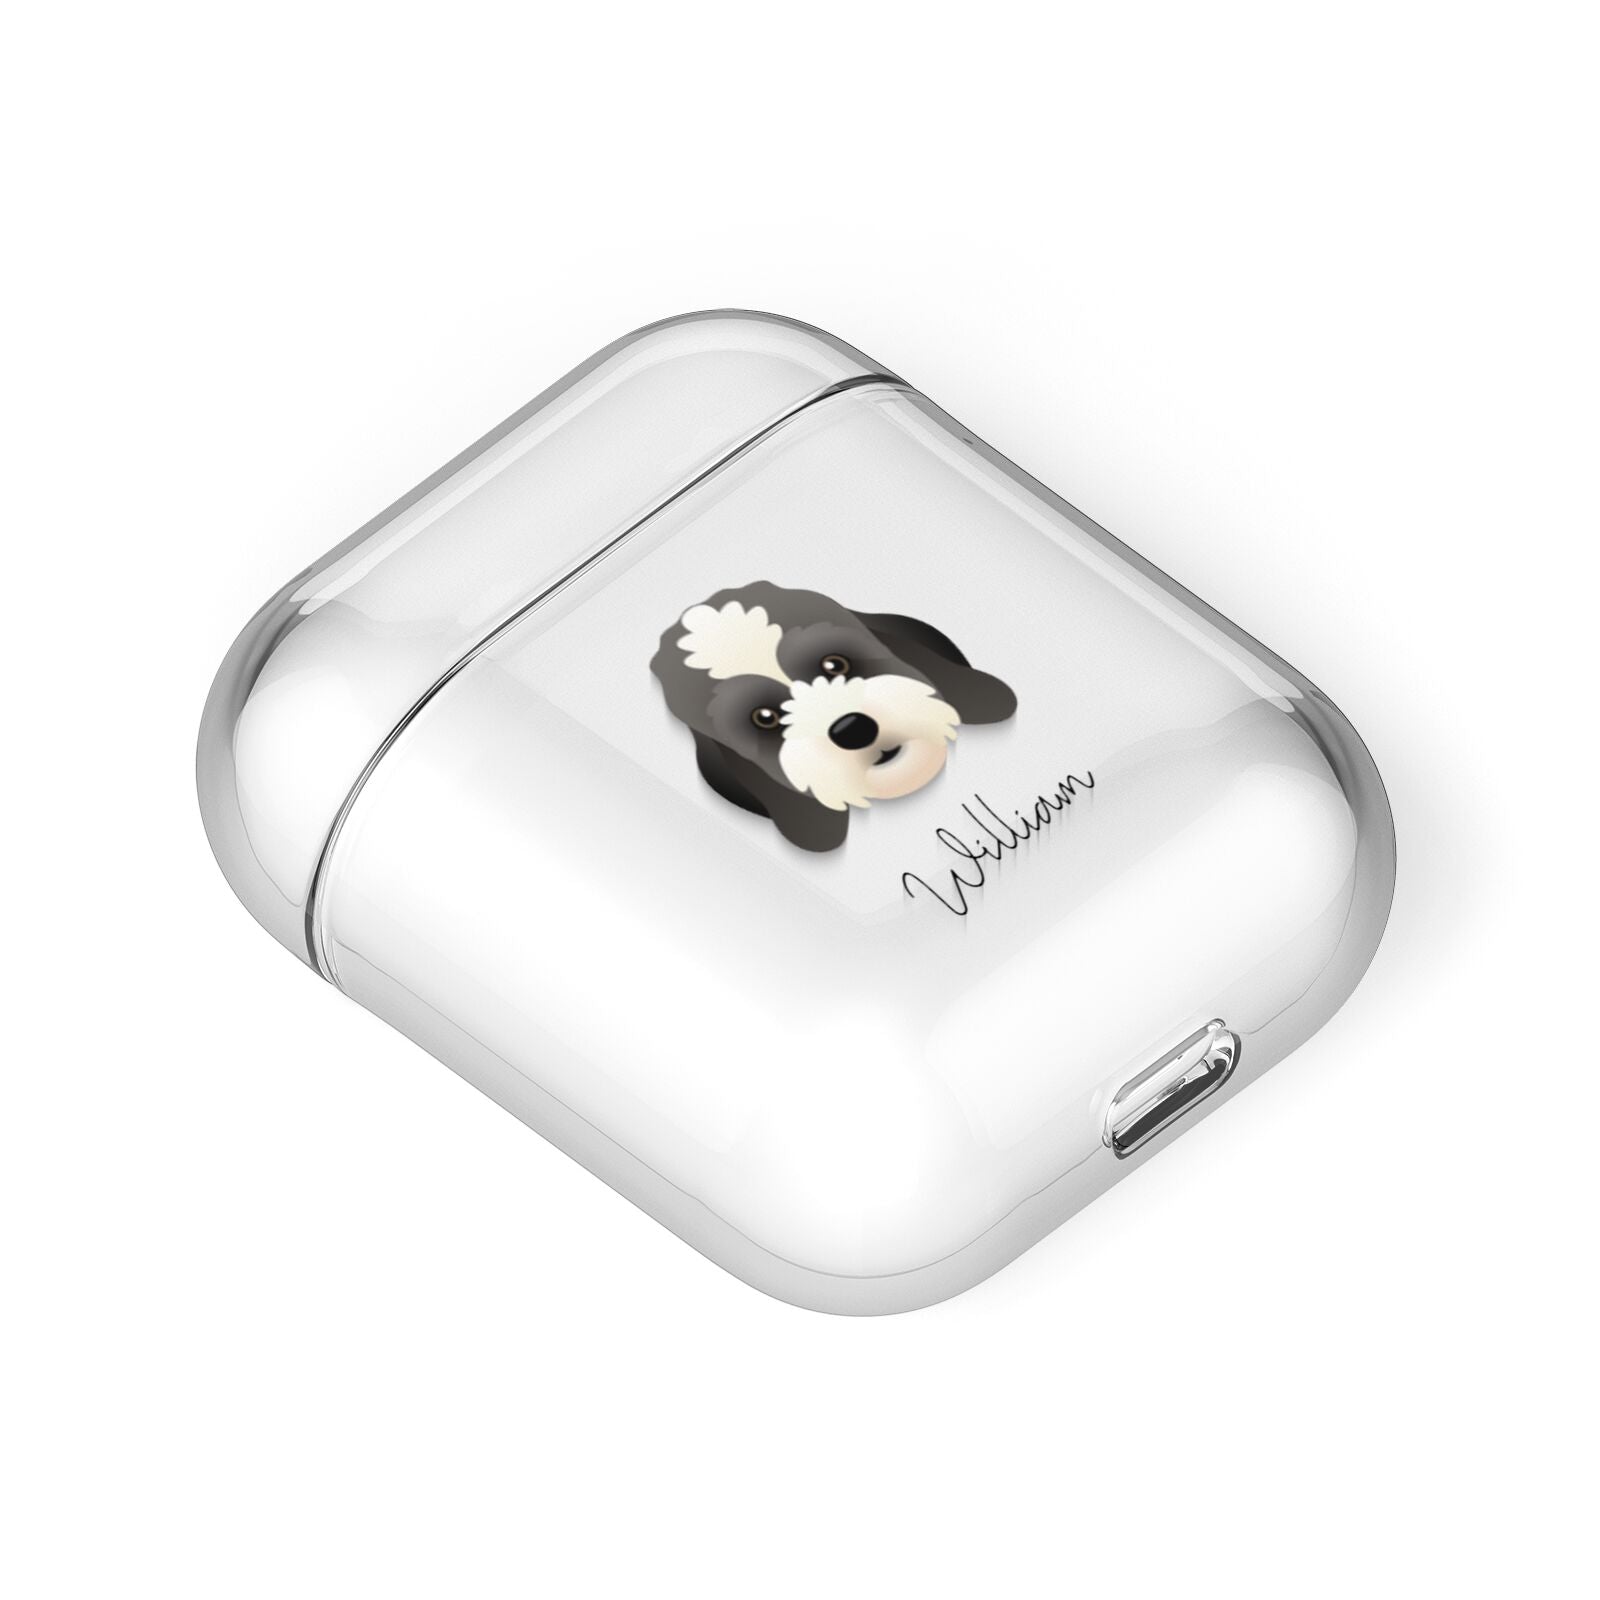 Lhasapoo Personalised AirPods Case Laid Flat